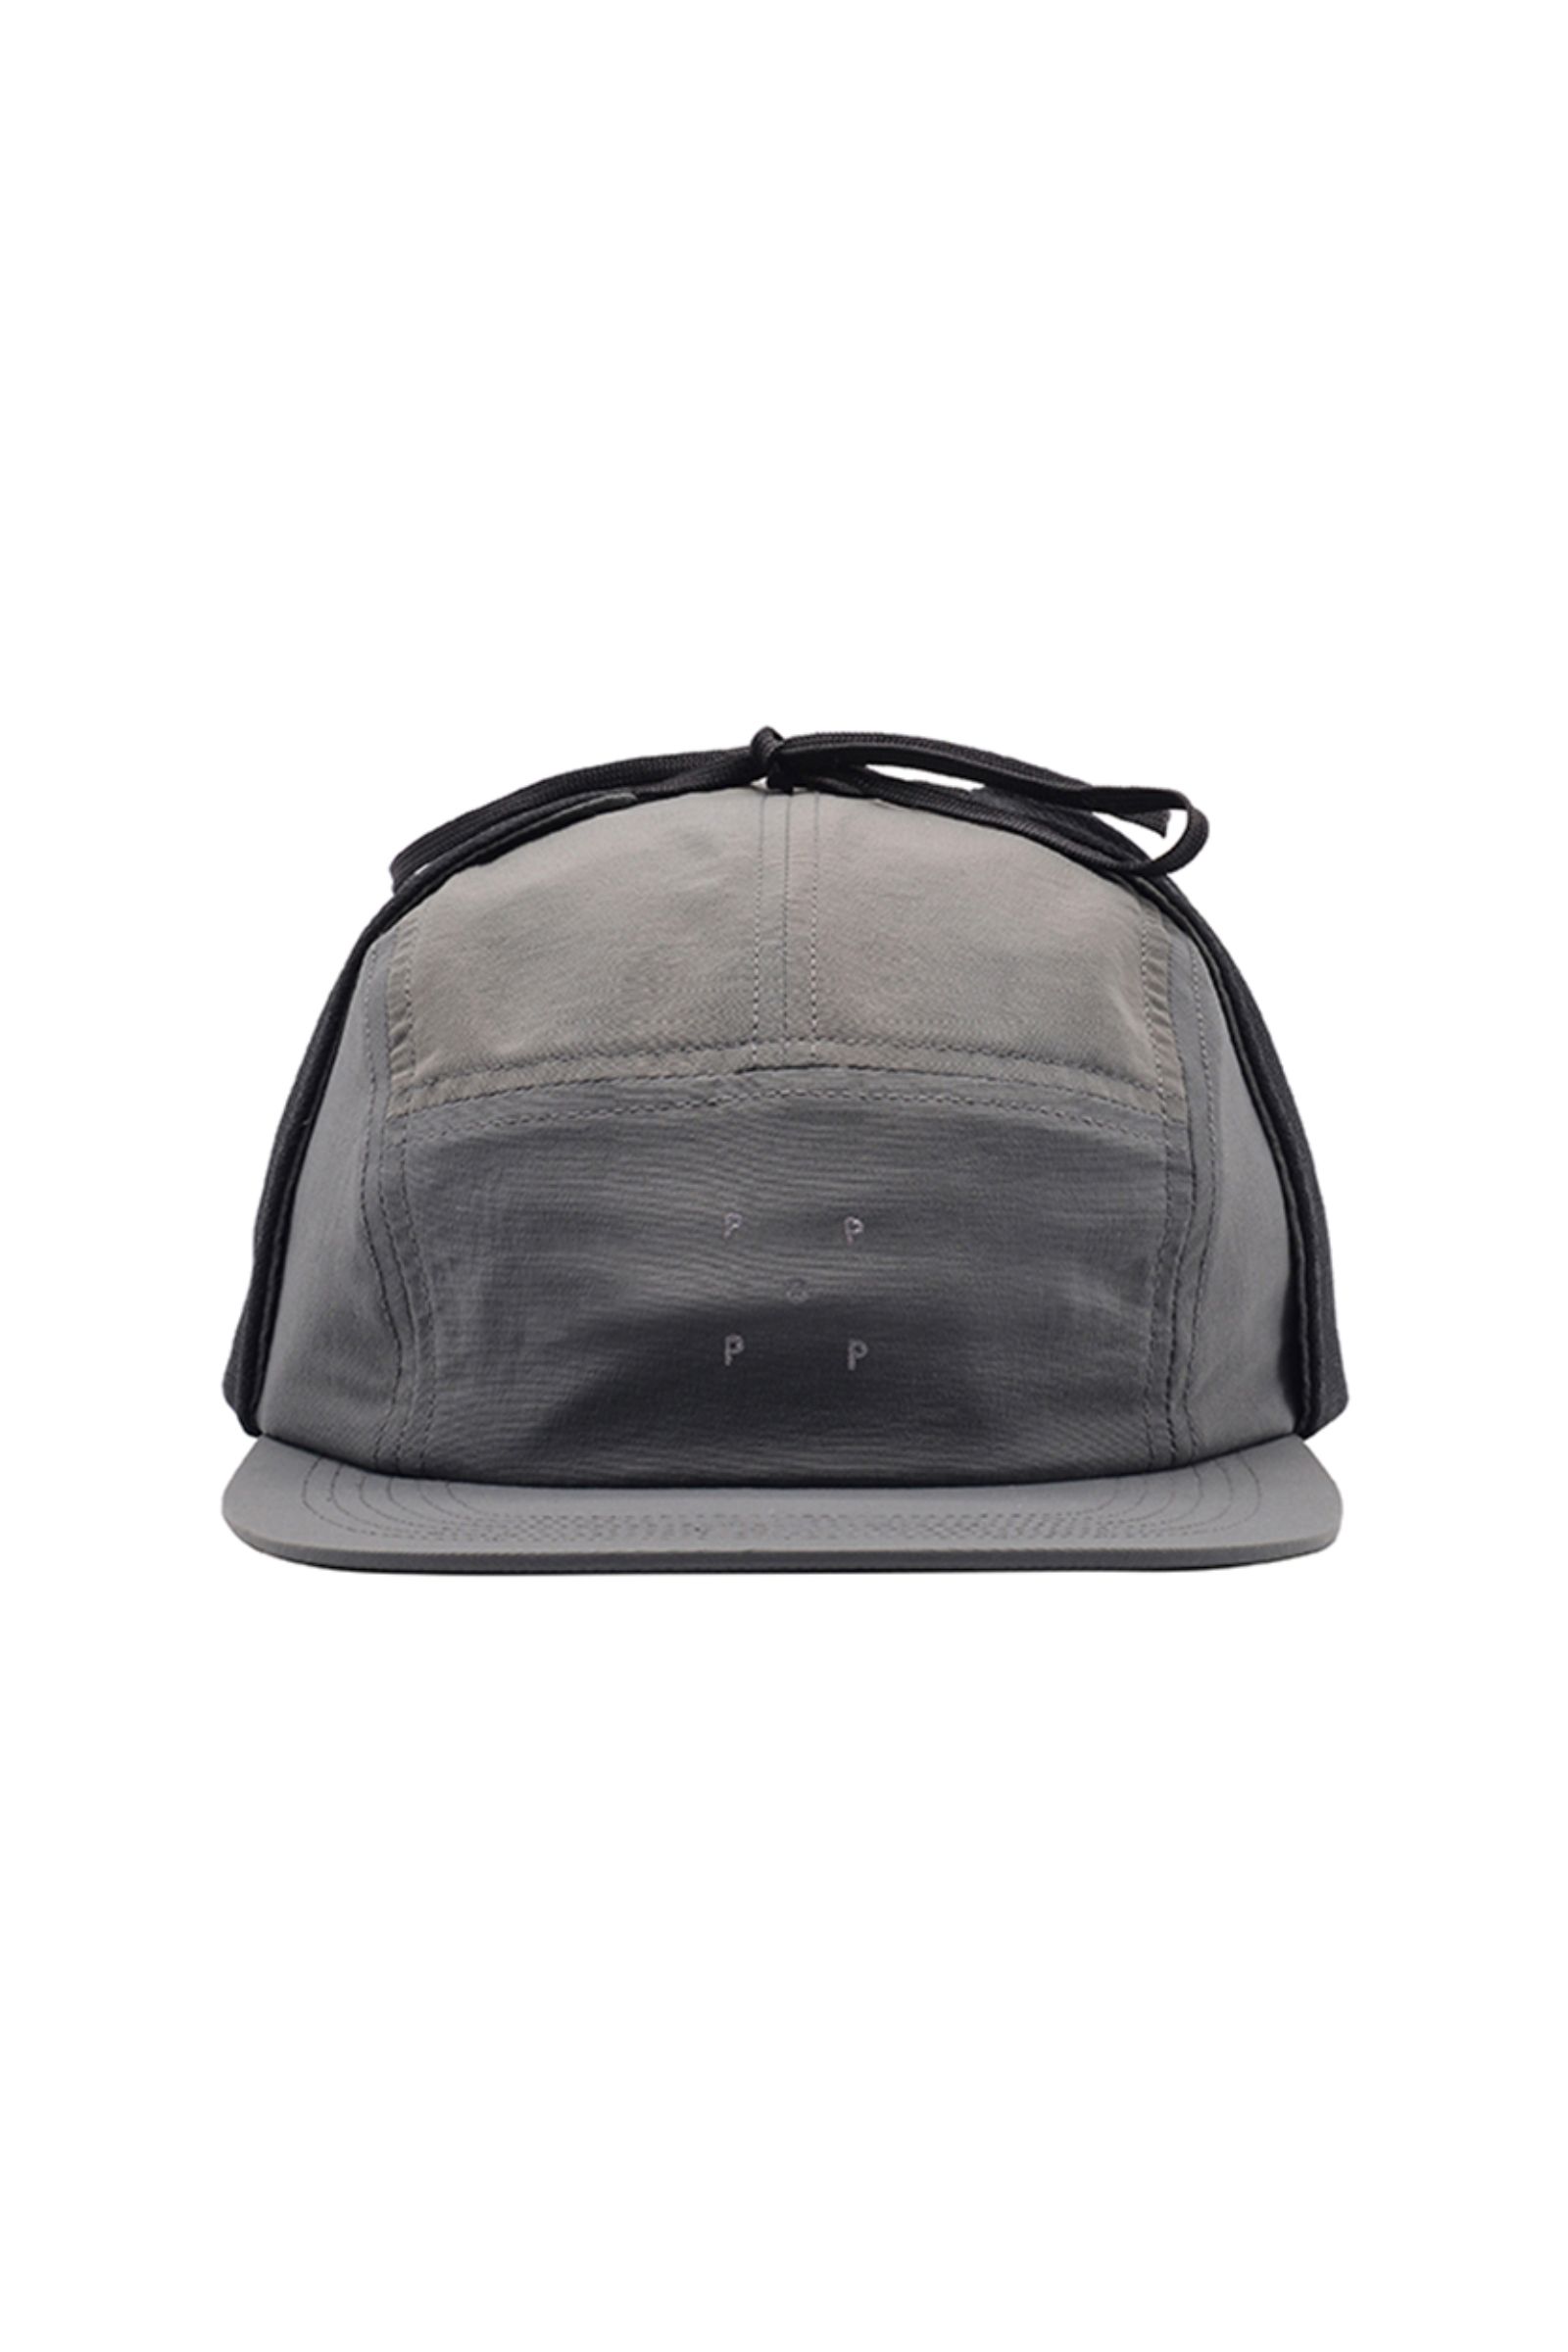 Pop Trading Company - earflap 5panel hat 21aw | asterisk